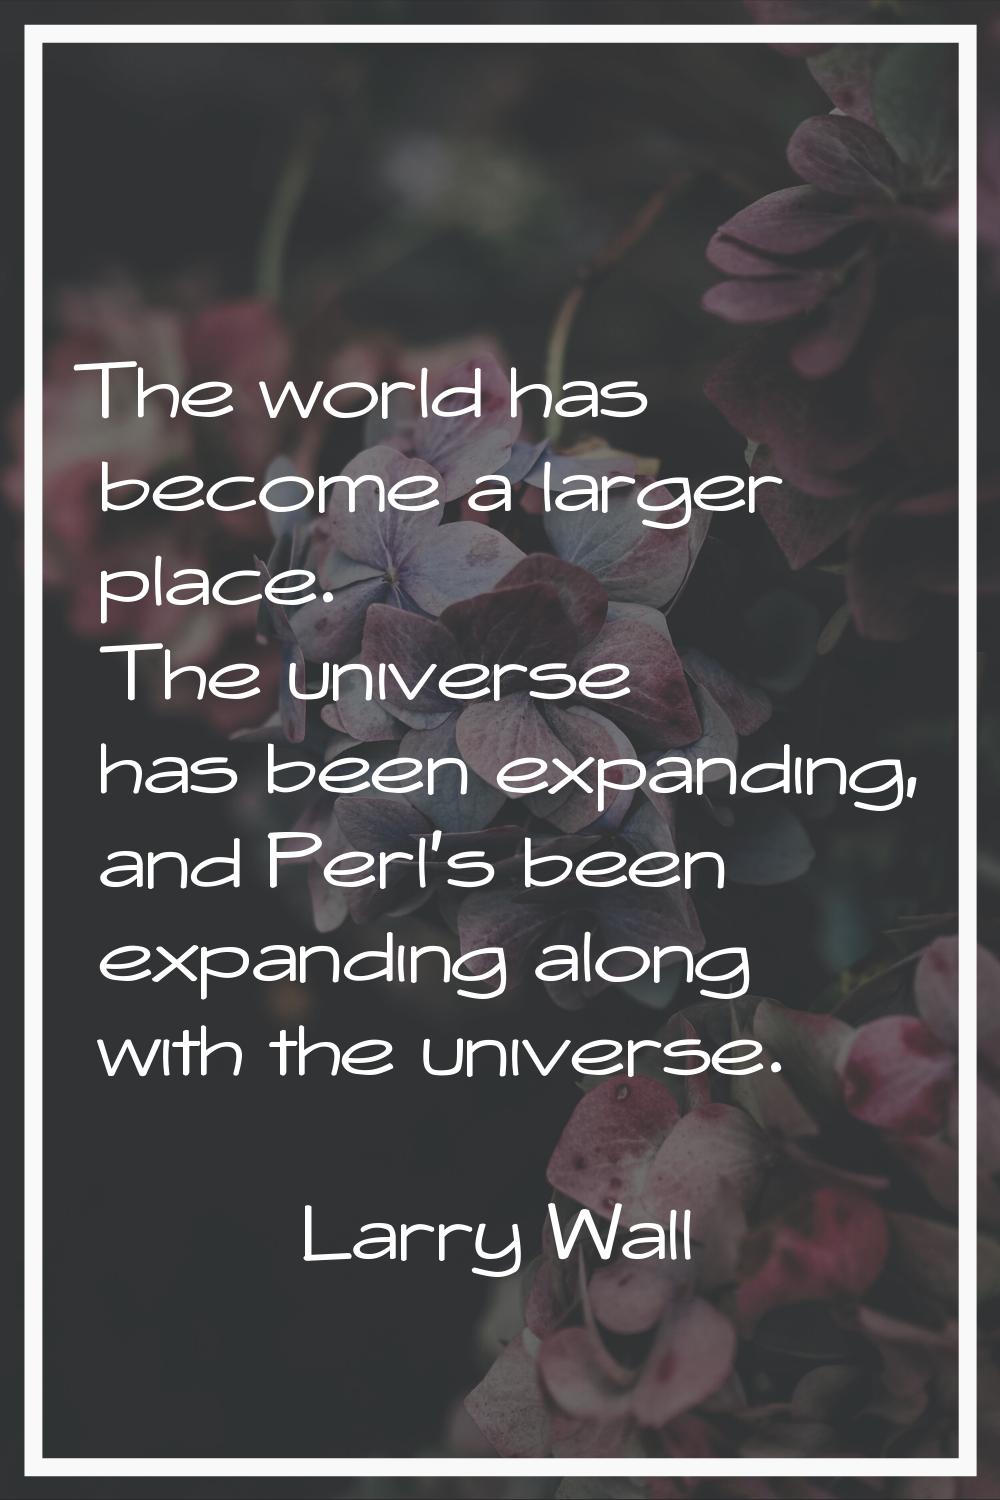 The world has become a larger place. The universe has been expanding, and Perl's been expanding alo